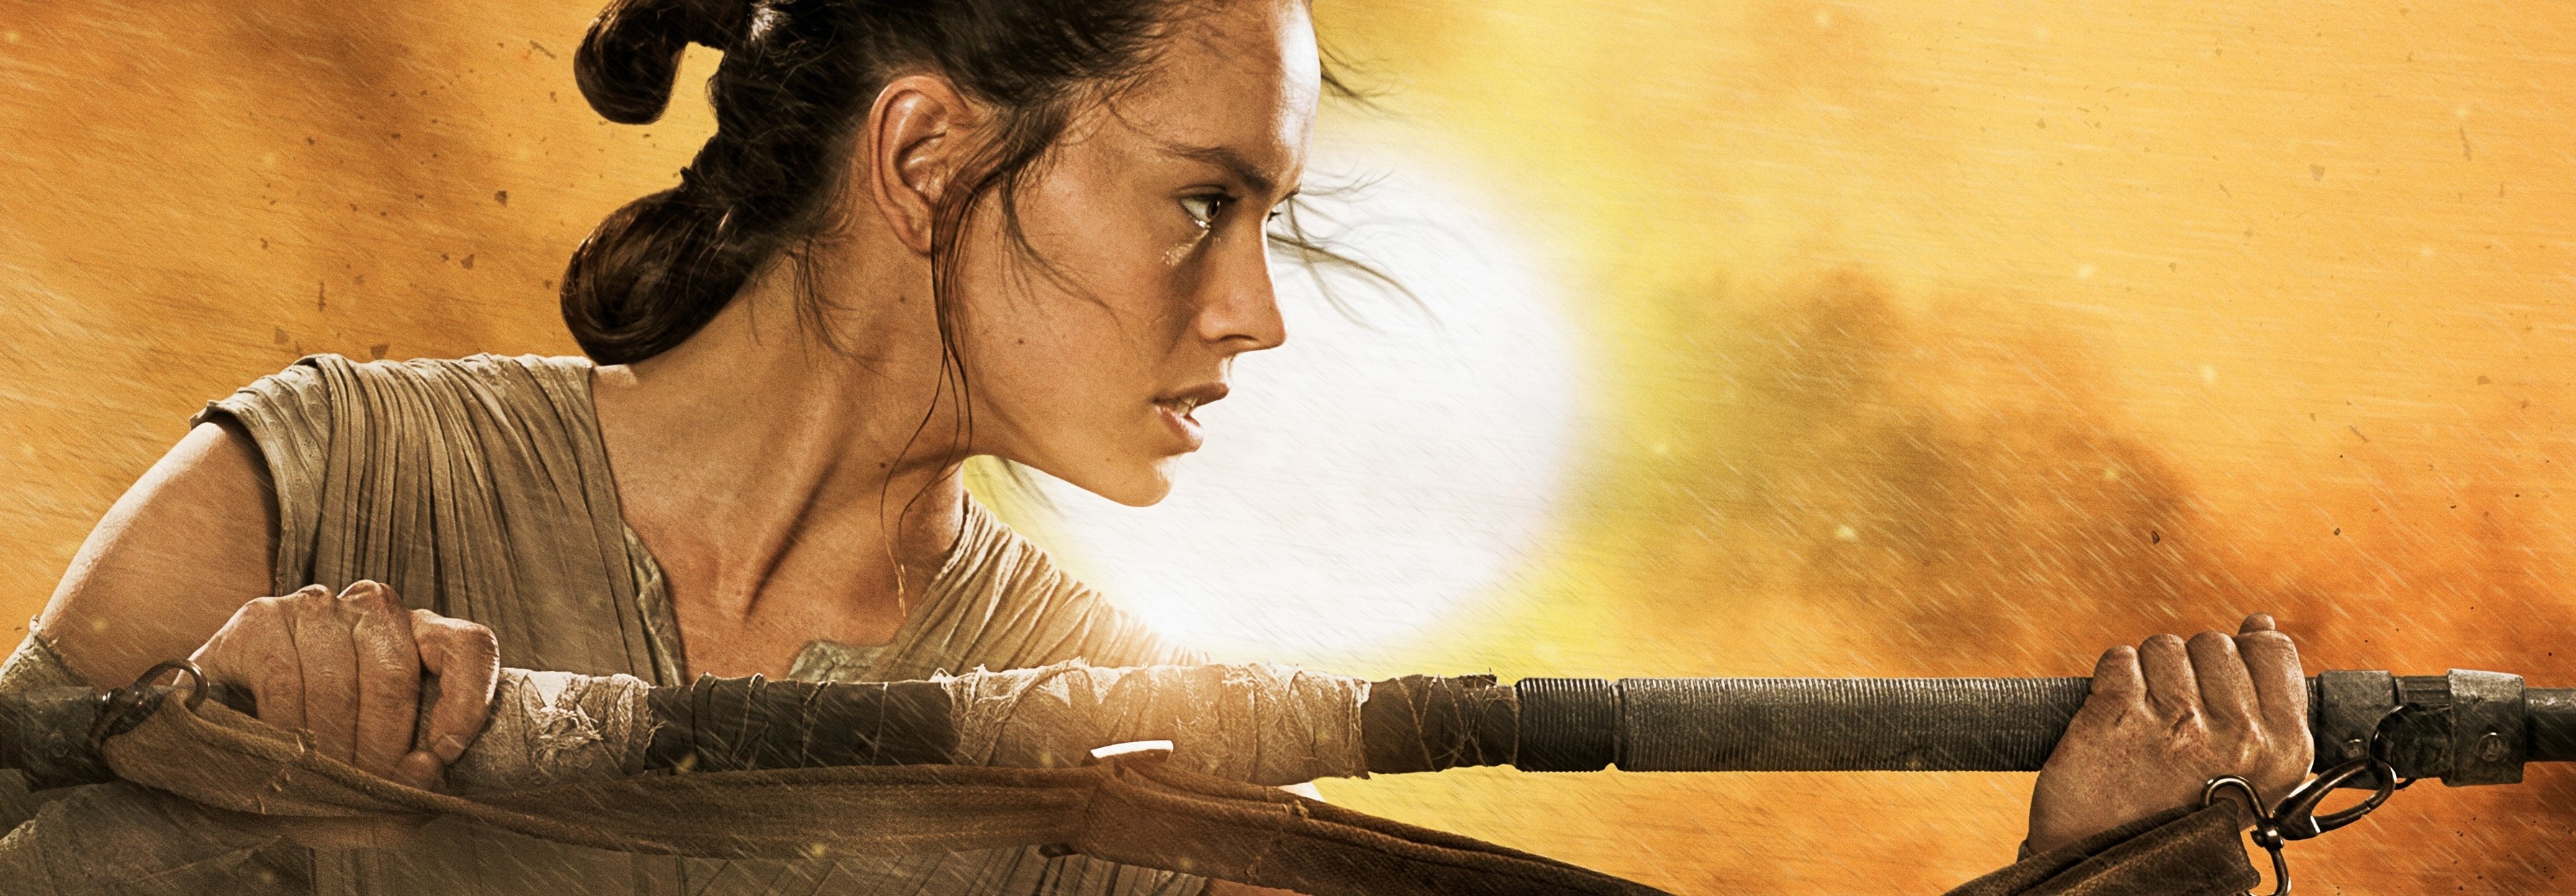 Star Wars: Episode VII   The Force Awakens, Movies, Daisy Ridley Wallpaper